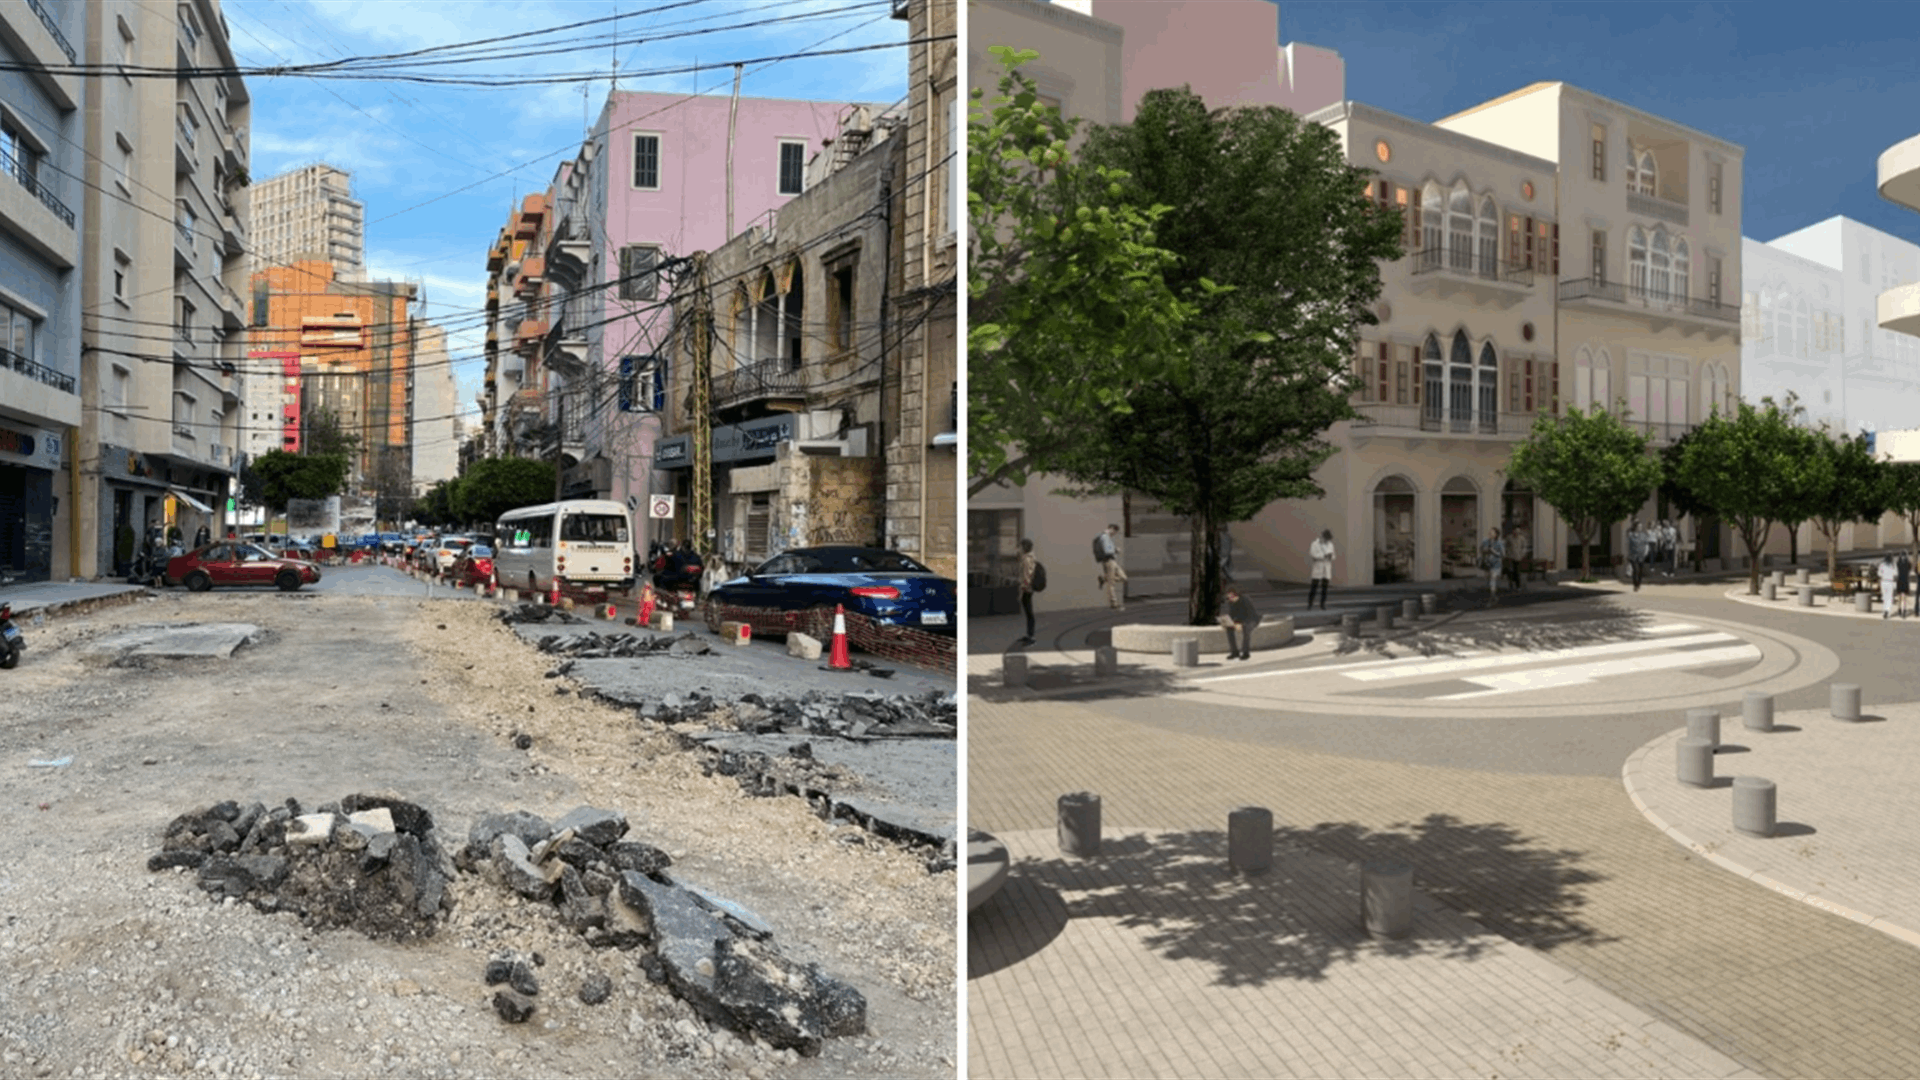 Beirut Municipality, AUB working on &quot;Mar Mikhael Piazza&quot; green square to promote pedestrian-friendly city